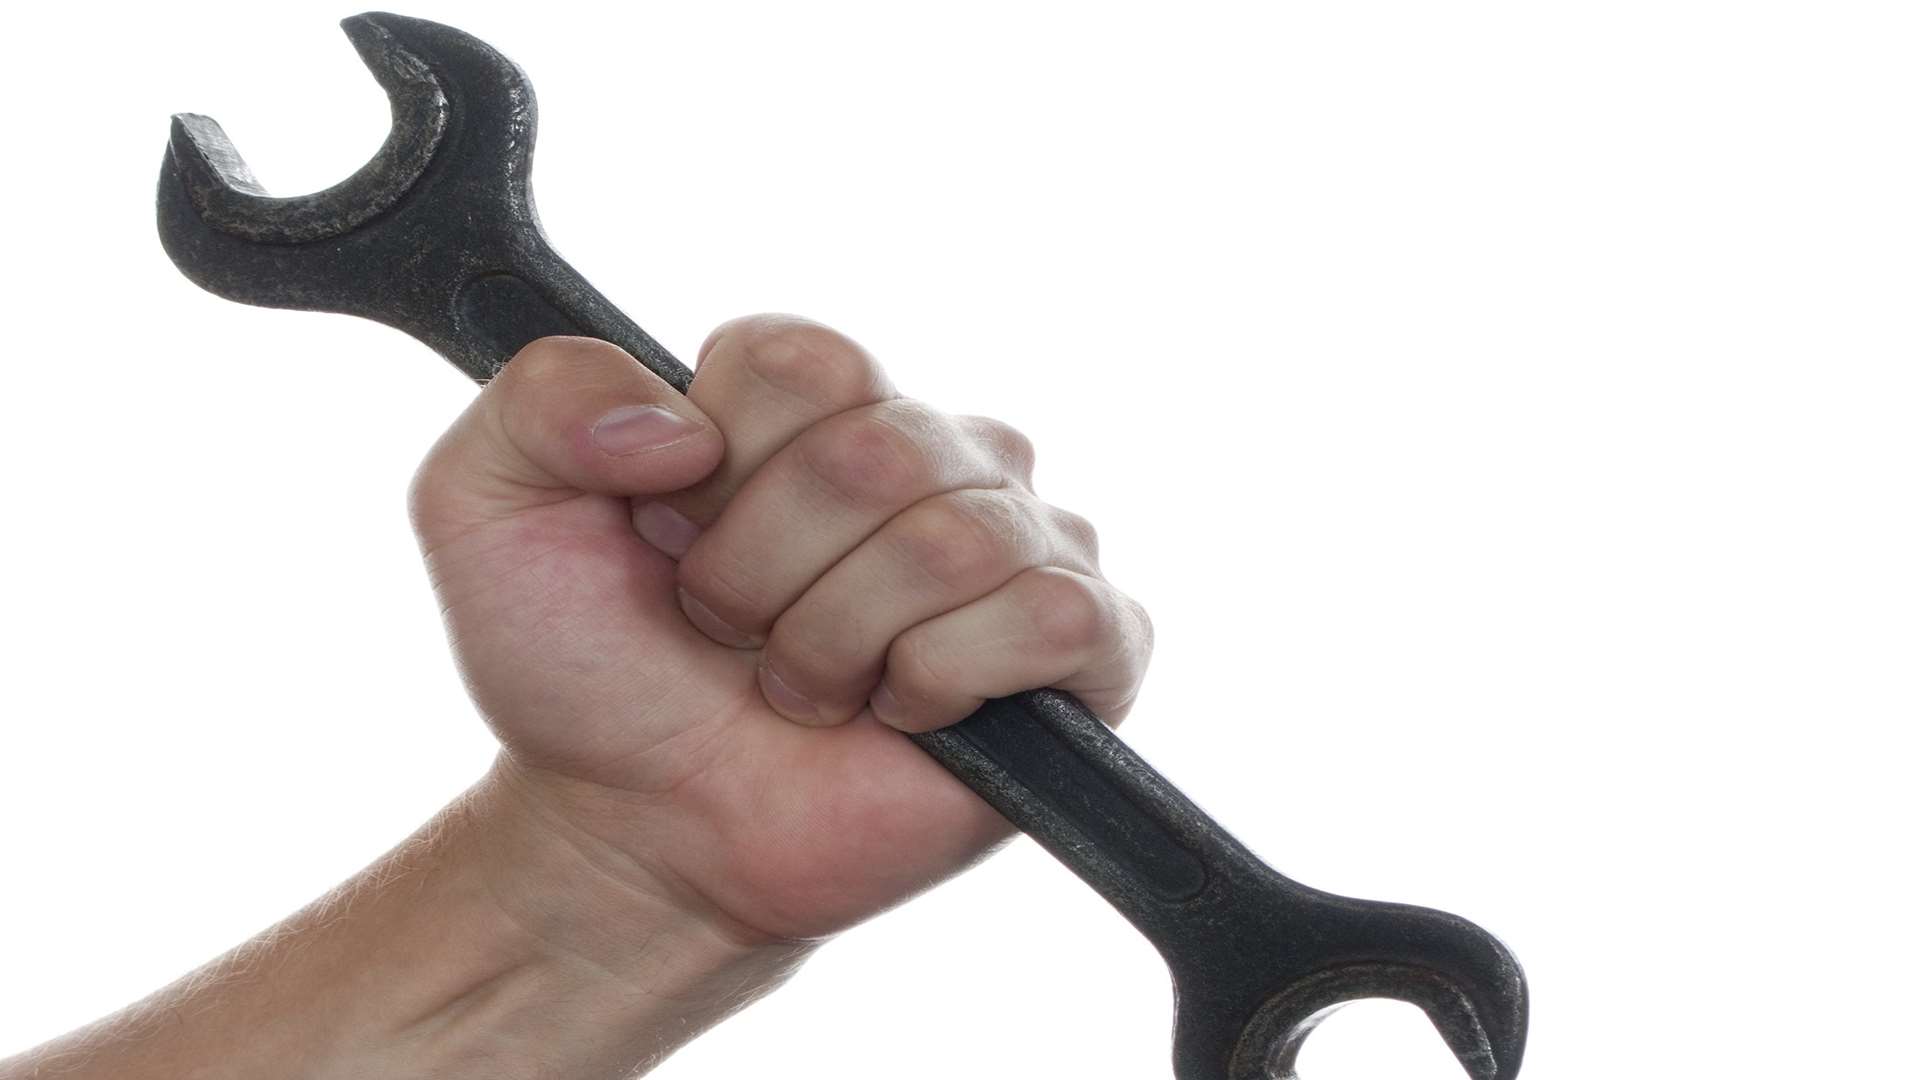 A spanner was allegedly used in the threat. Stock image.